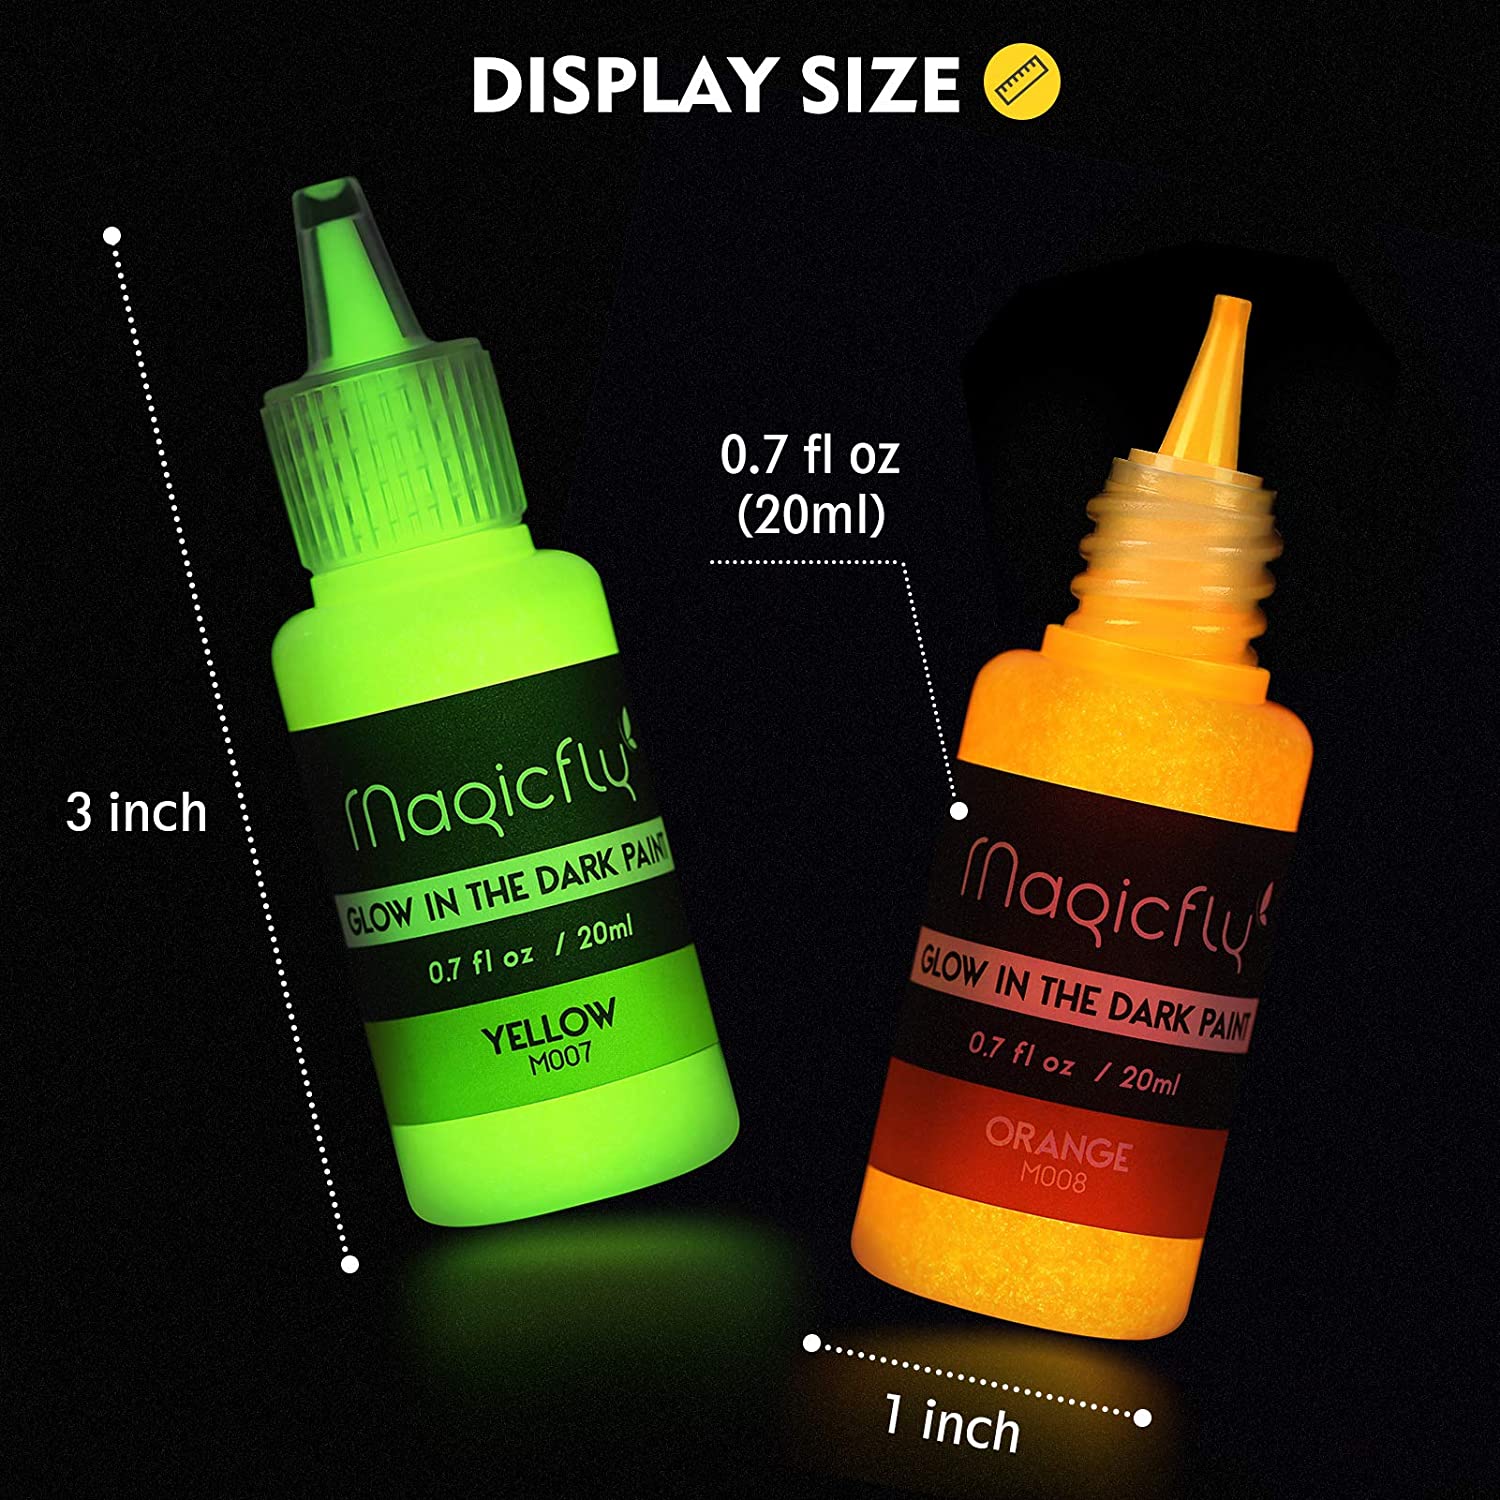 Magicfly Glow in The Dark Paint